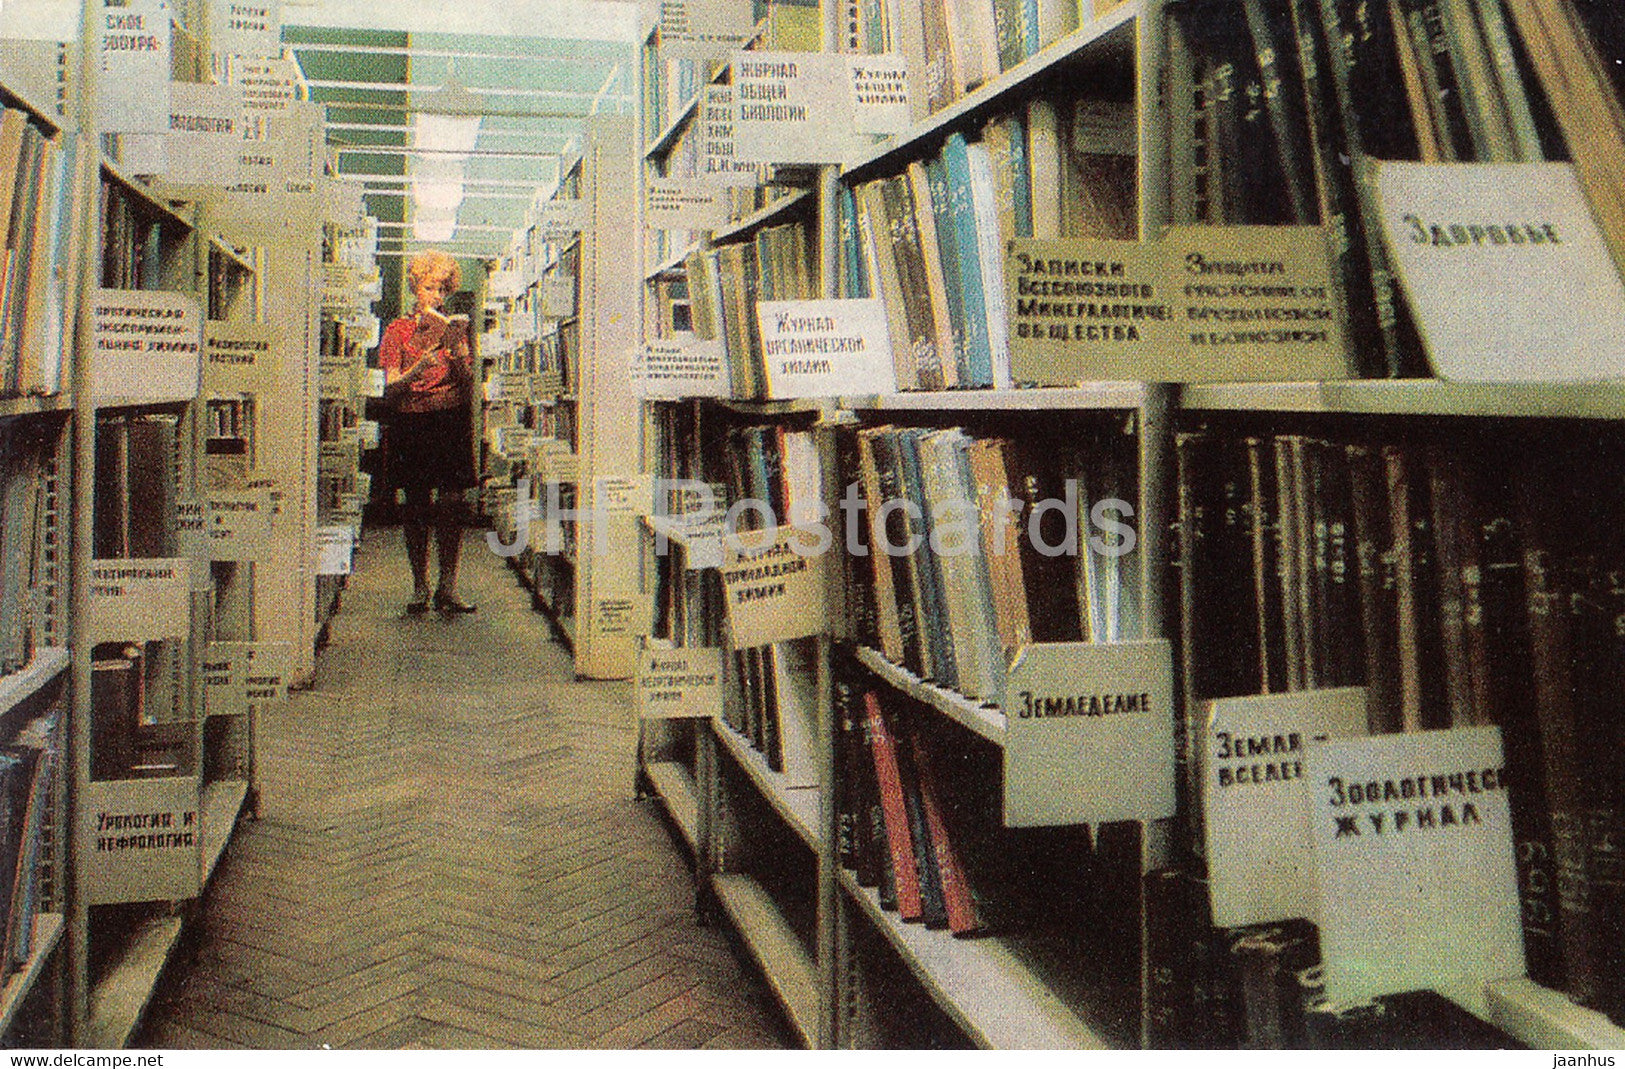 Moscow - Lenin State Library - Free access shelves - 1974 - Russia USSR - unused - JH Postcards